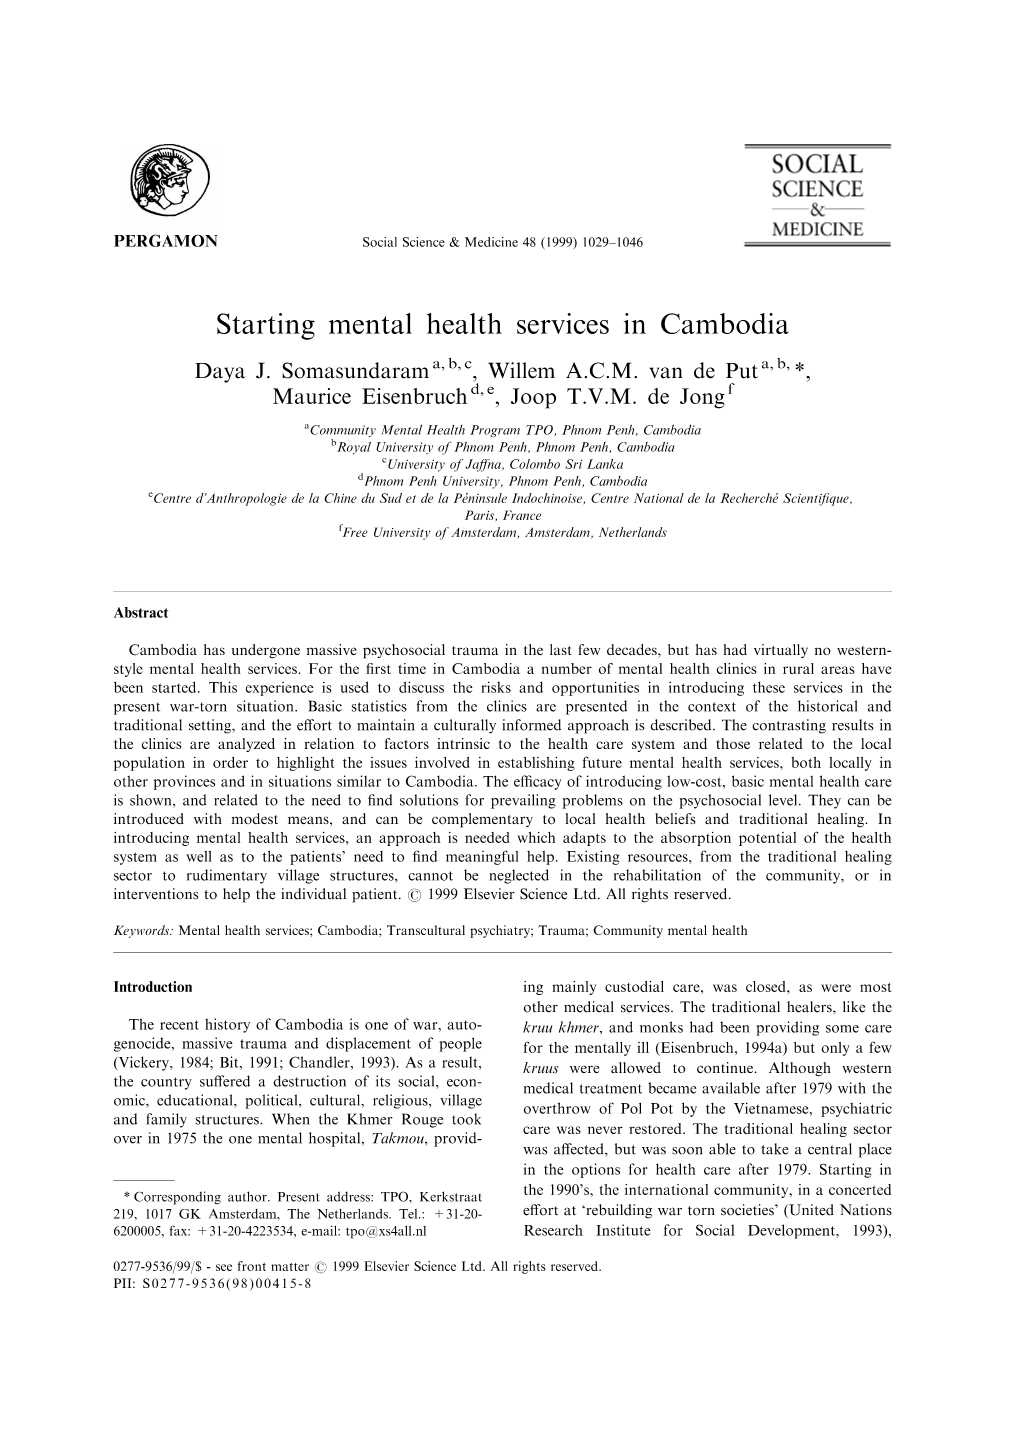 Starting Mental Health Services in Cambodia